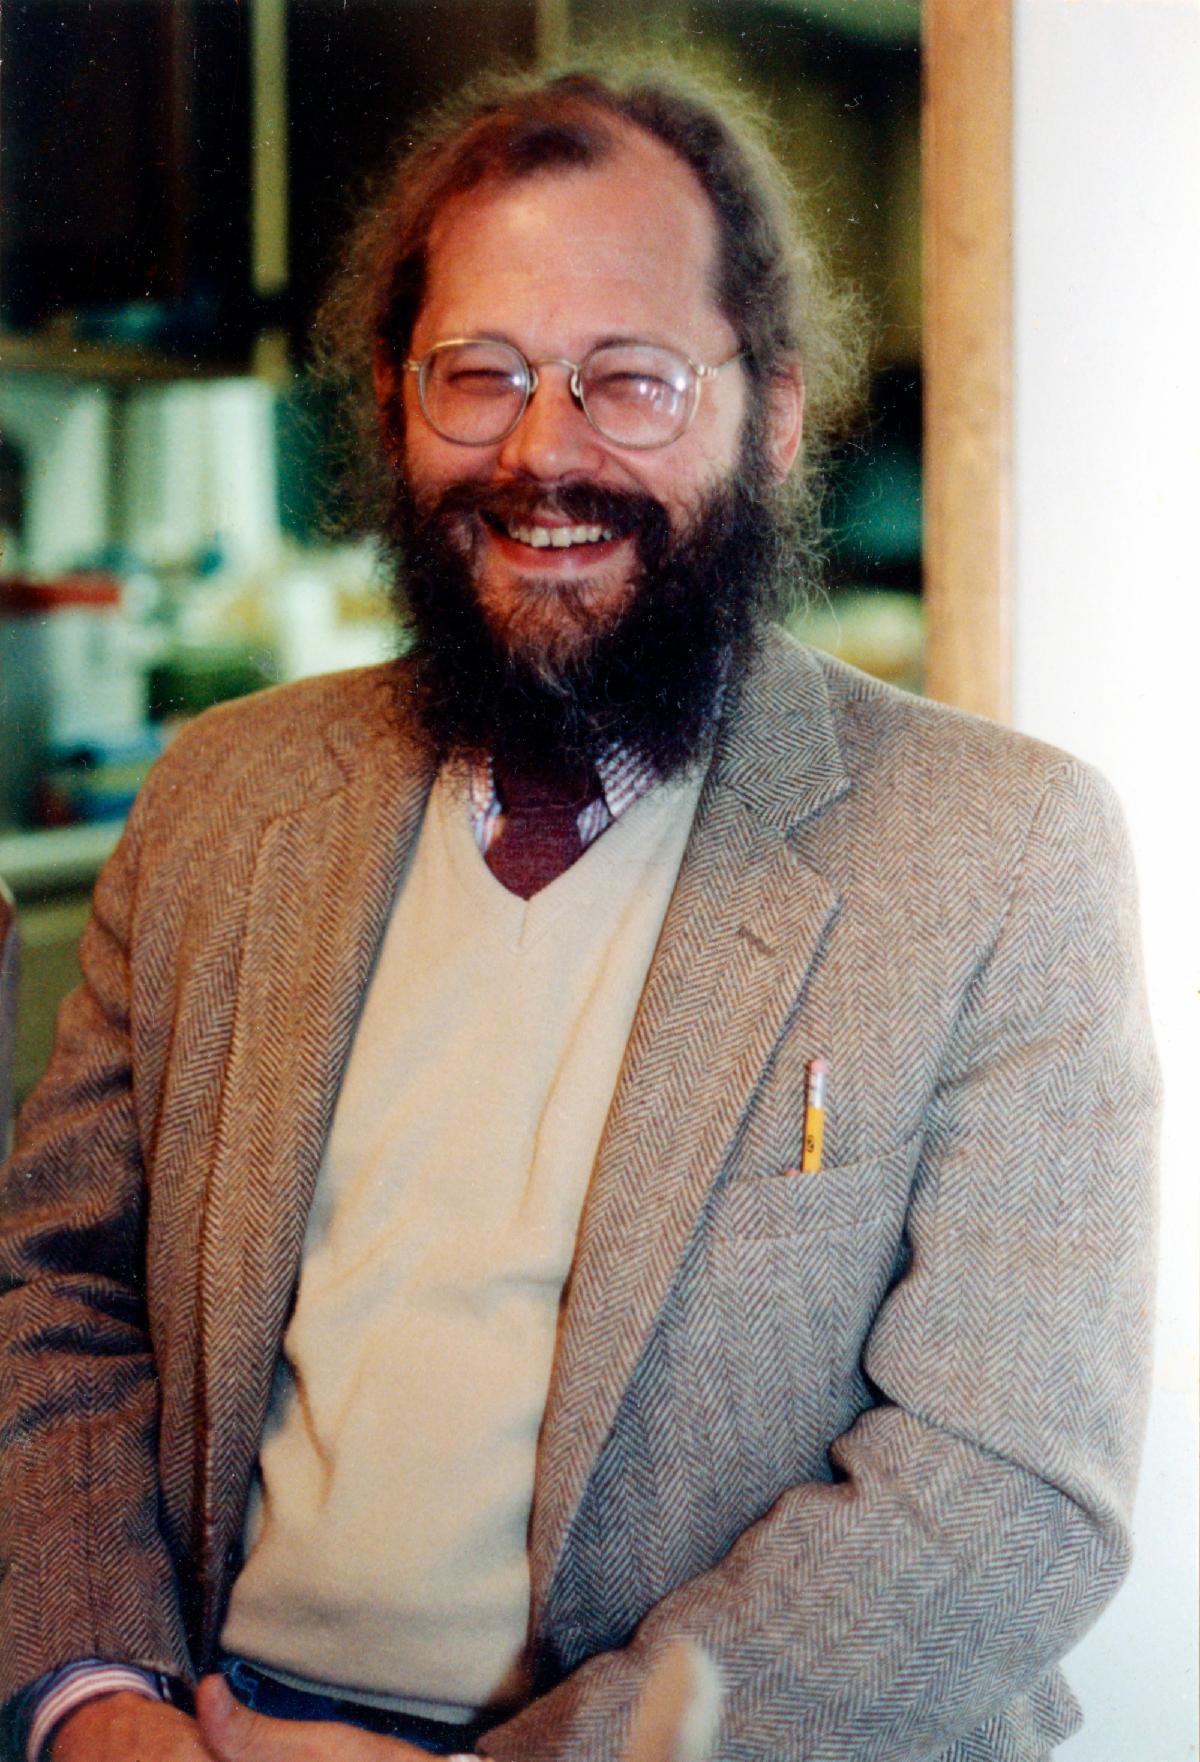 Bearded man in glasses, jacket, vest, and tie smiling